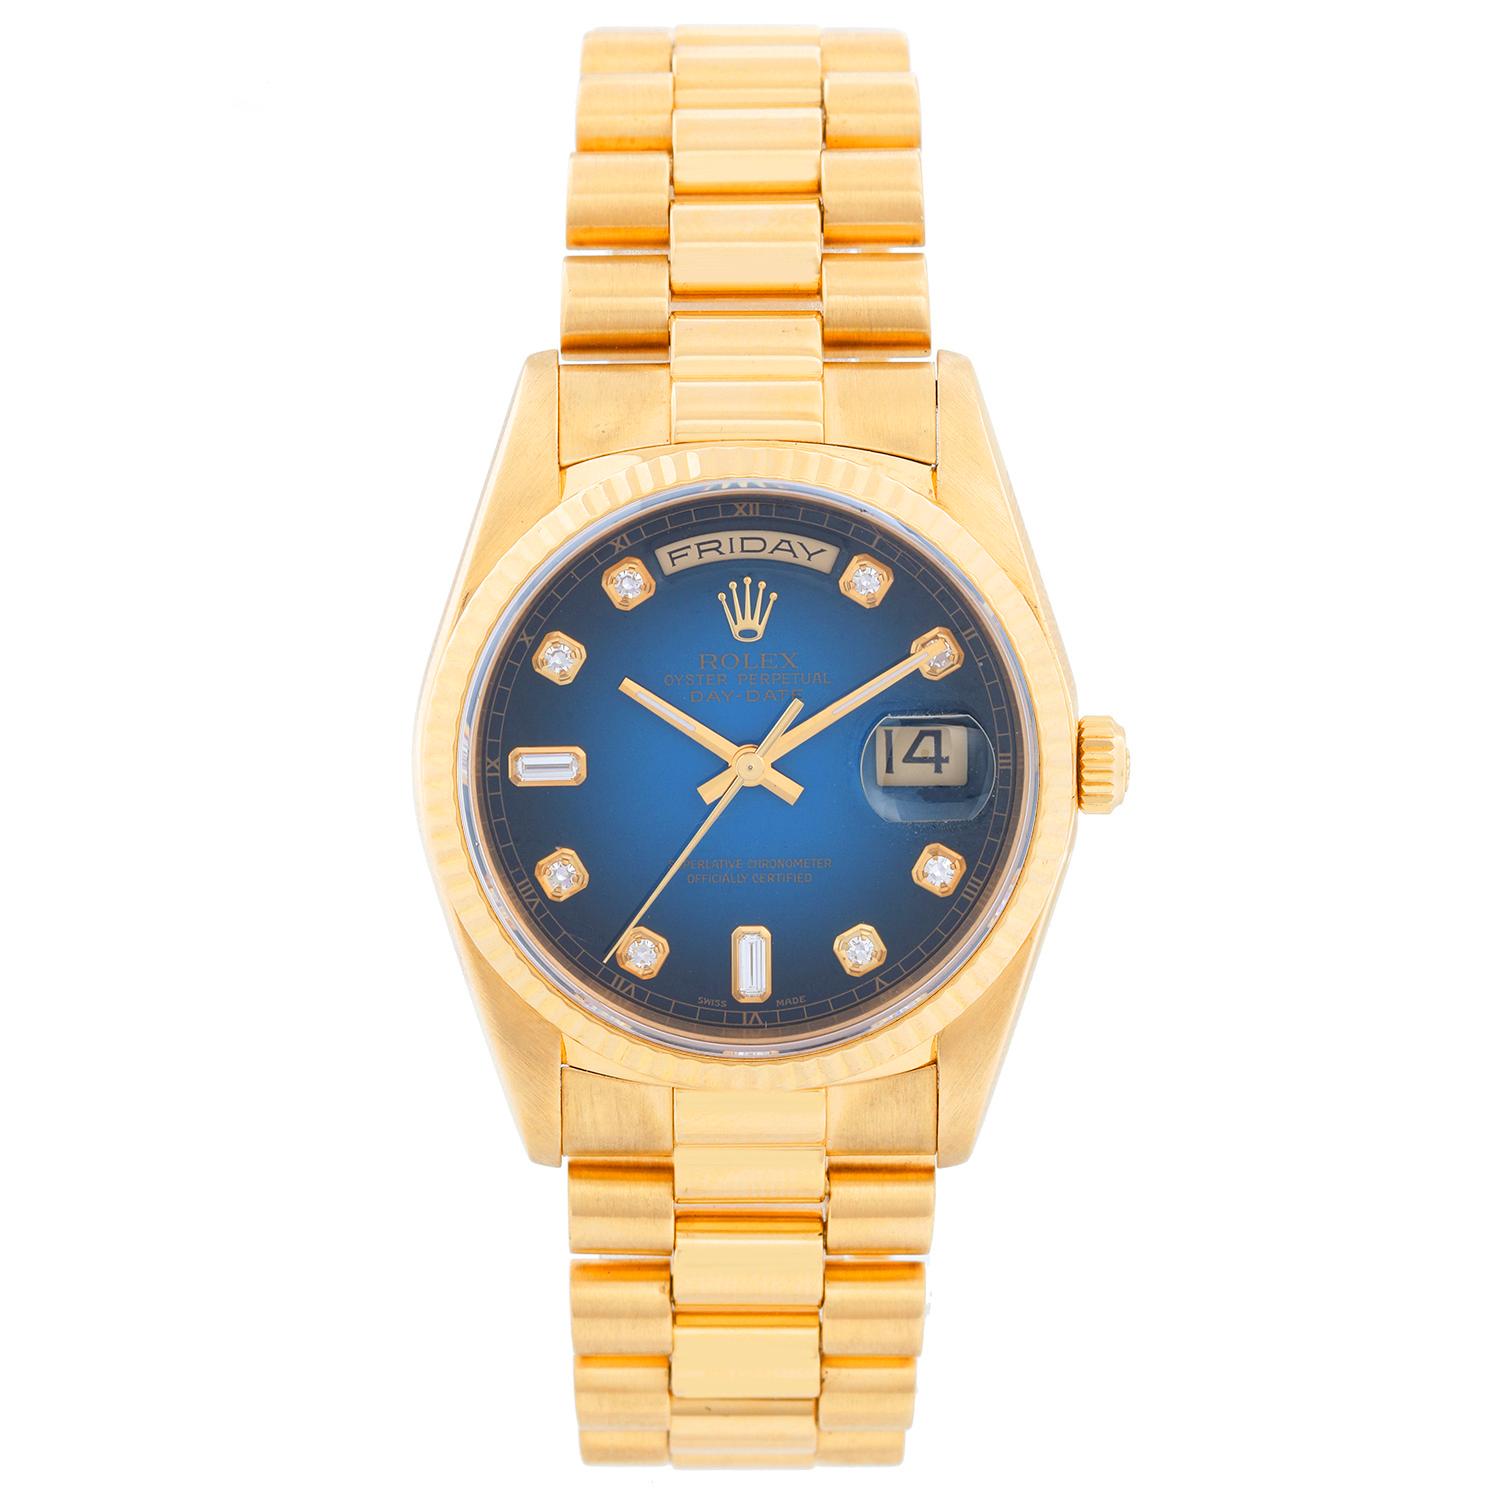 Rolex President Day-Date Men's 18k Gold Watch 18238 -  Automatic winding; quick-set; sapphire crystal. 18k yellow gold case with Fluted bezel (36mm diameter). Blue vignette diamond dial. 18k yellow gold hidden-clasp President bracelet. Pre-owned